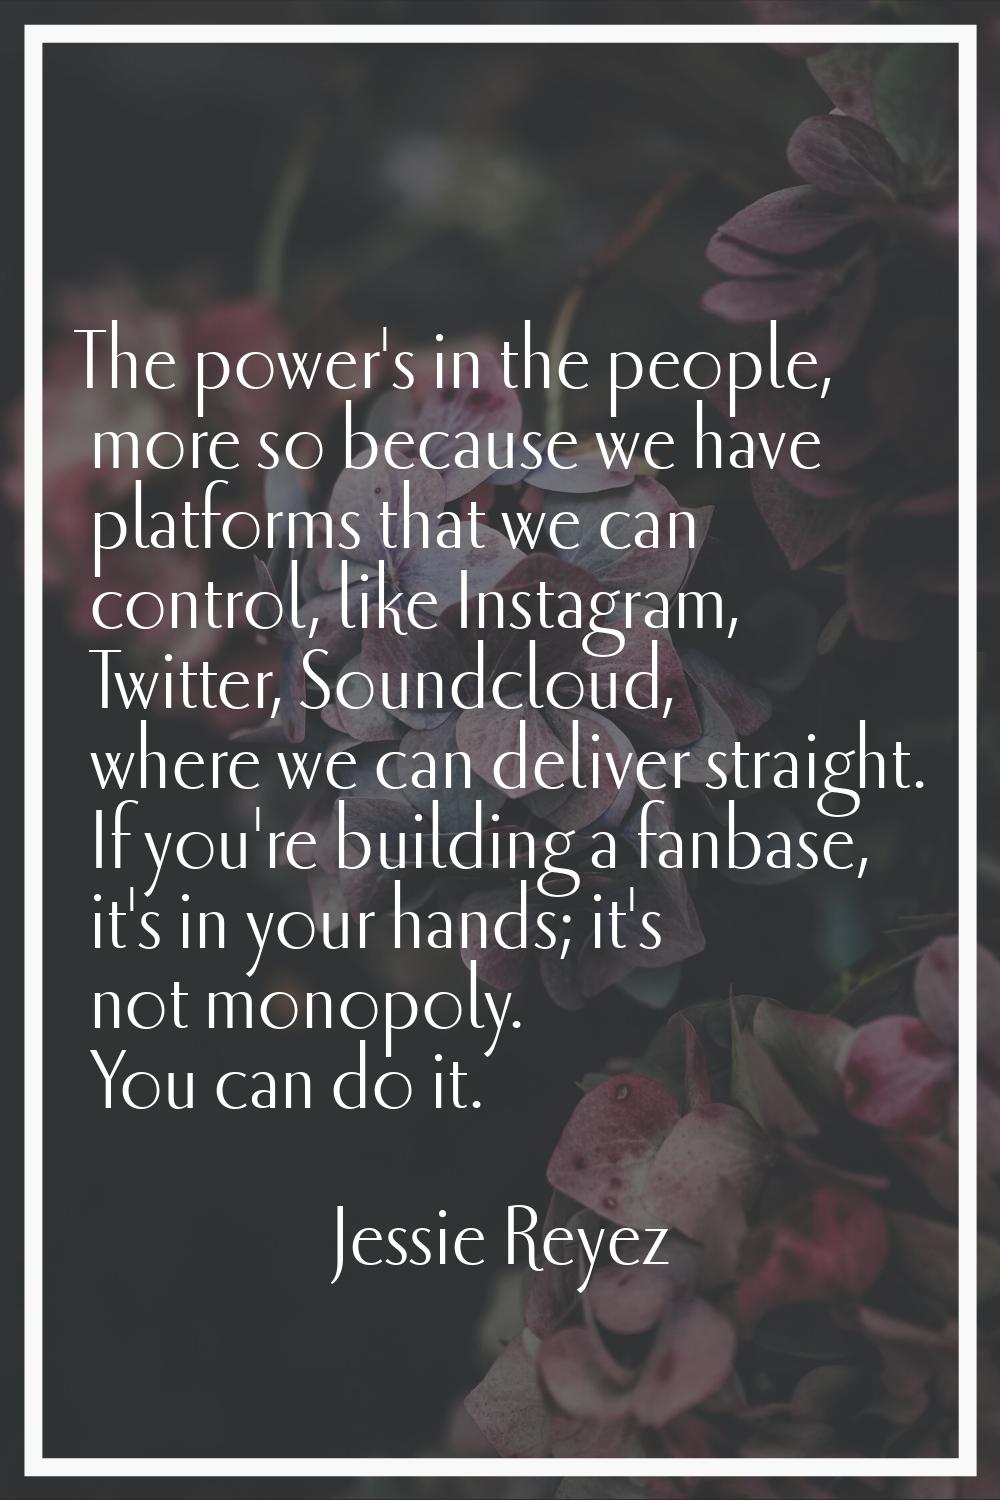 The power's in the people, more so because we have platforms that we can control, like Instagram, T